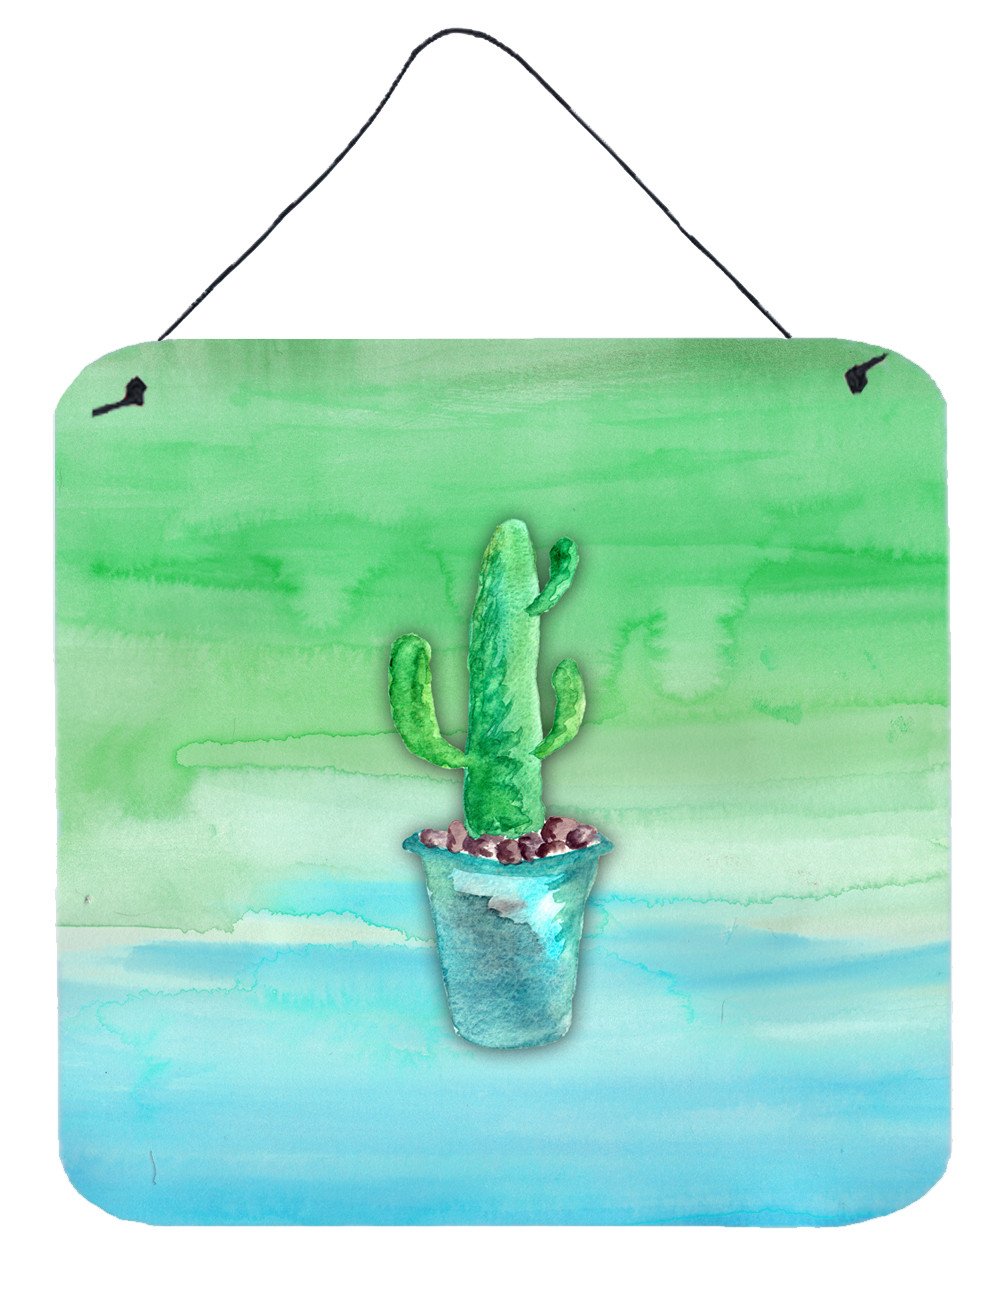 Cactus Teal and Green Watercolor Wall or Door Hanging Prints BB7362DS66 by Caroline's Treasures